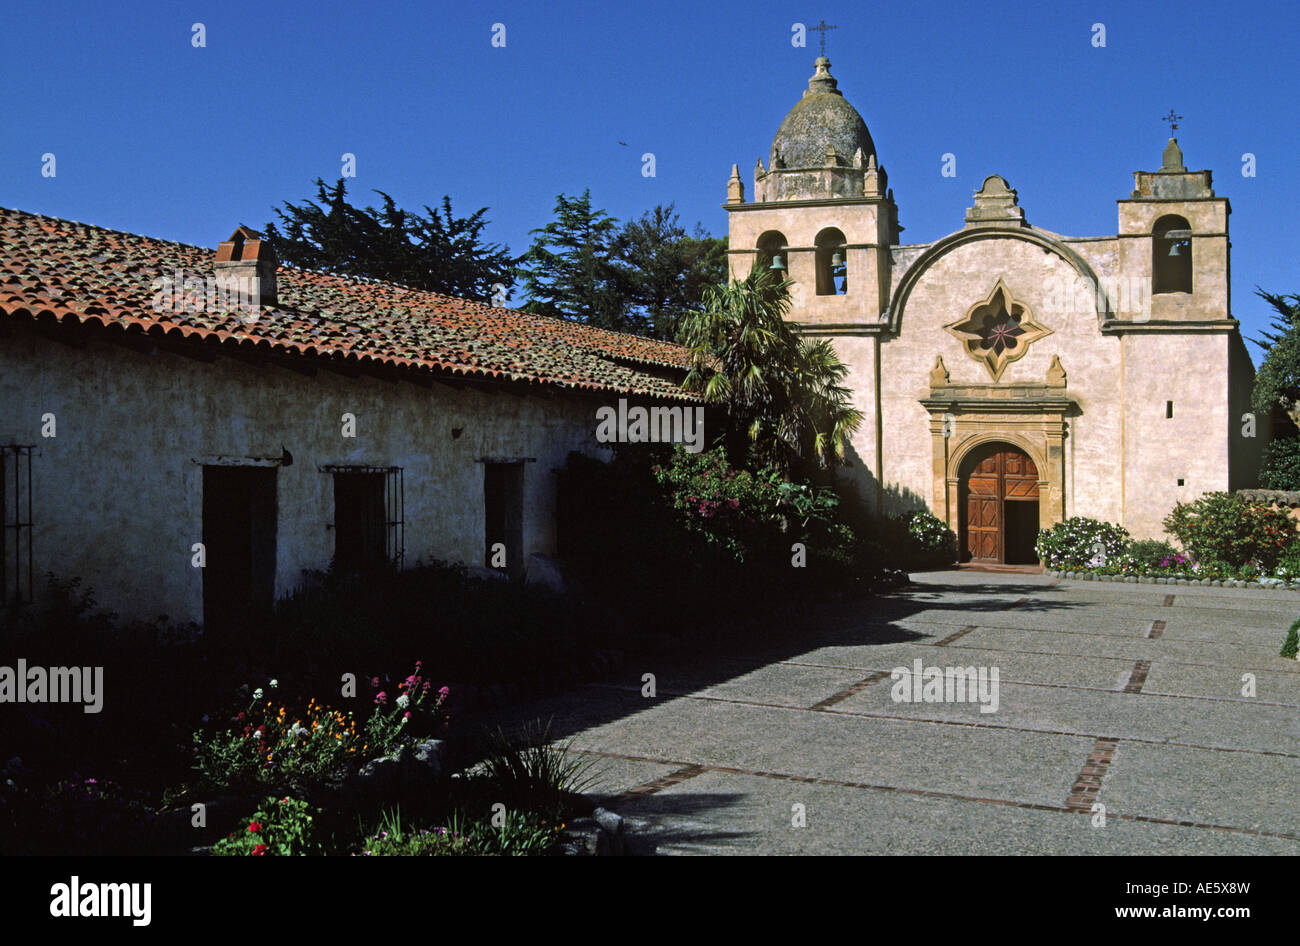 Father JUNIPERO SERRA founded the CARMEL MISSION with the help of the local Indian population CARMEL CALIFORNIA Stock Photo